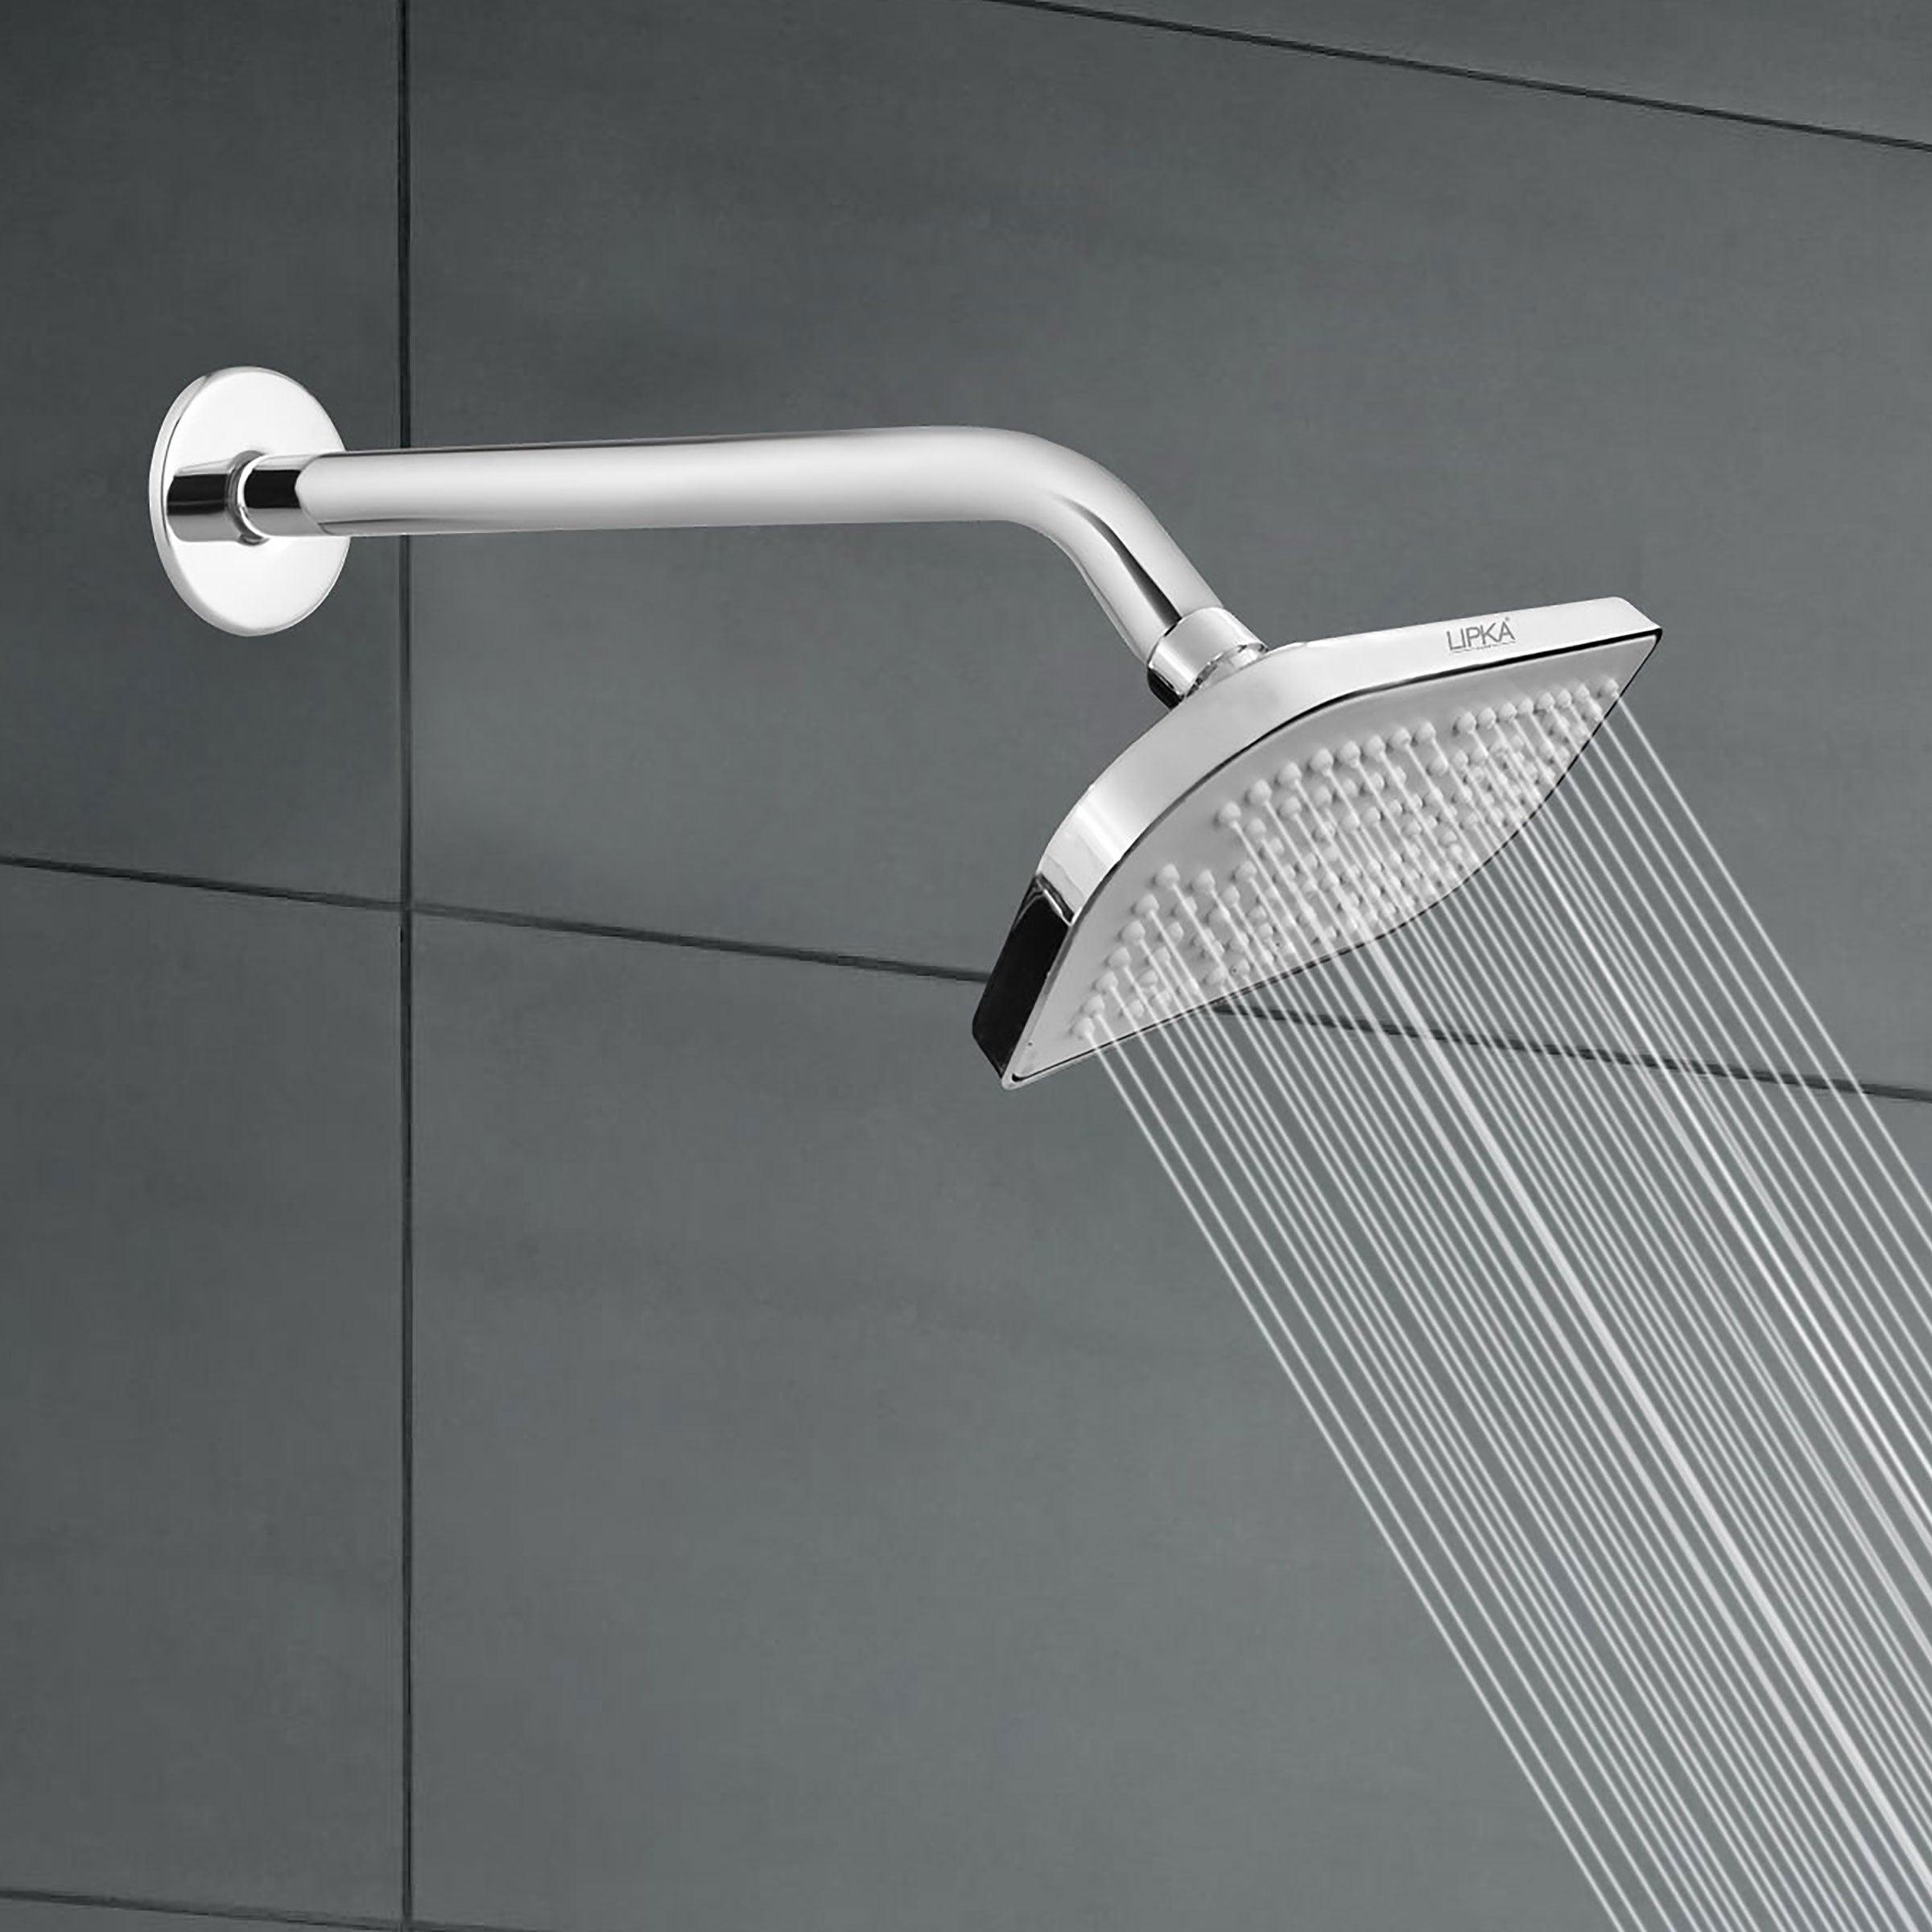 Madrid Overhead Shower (3.25 x 5 Inches) in bathroom